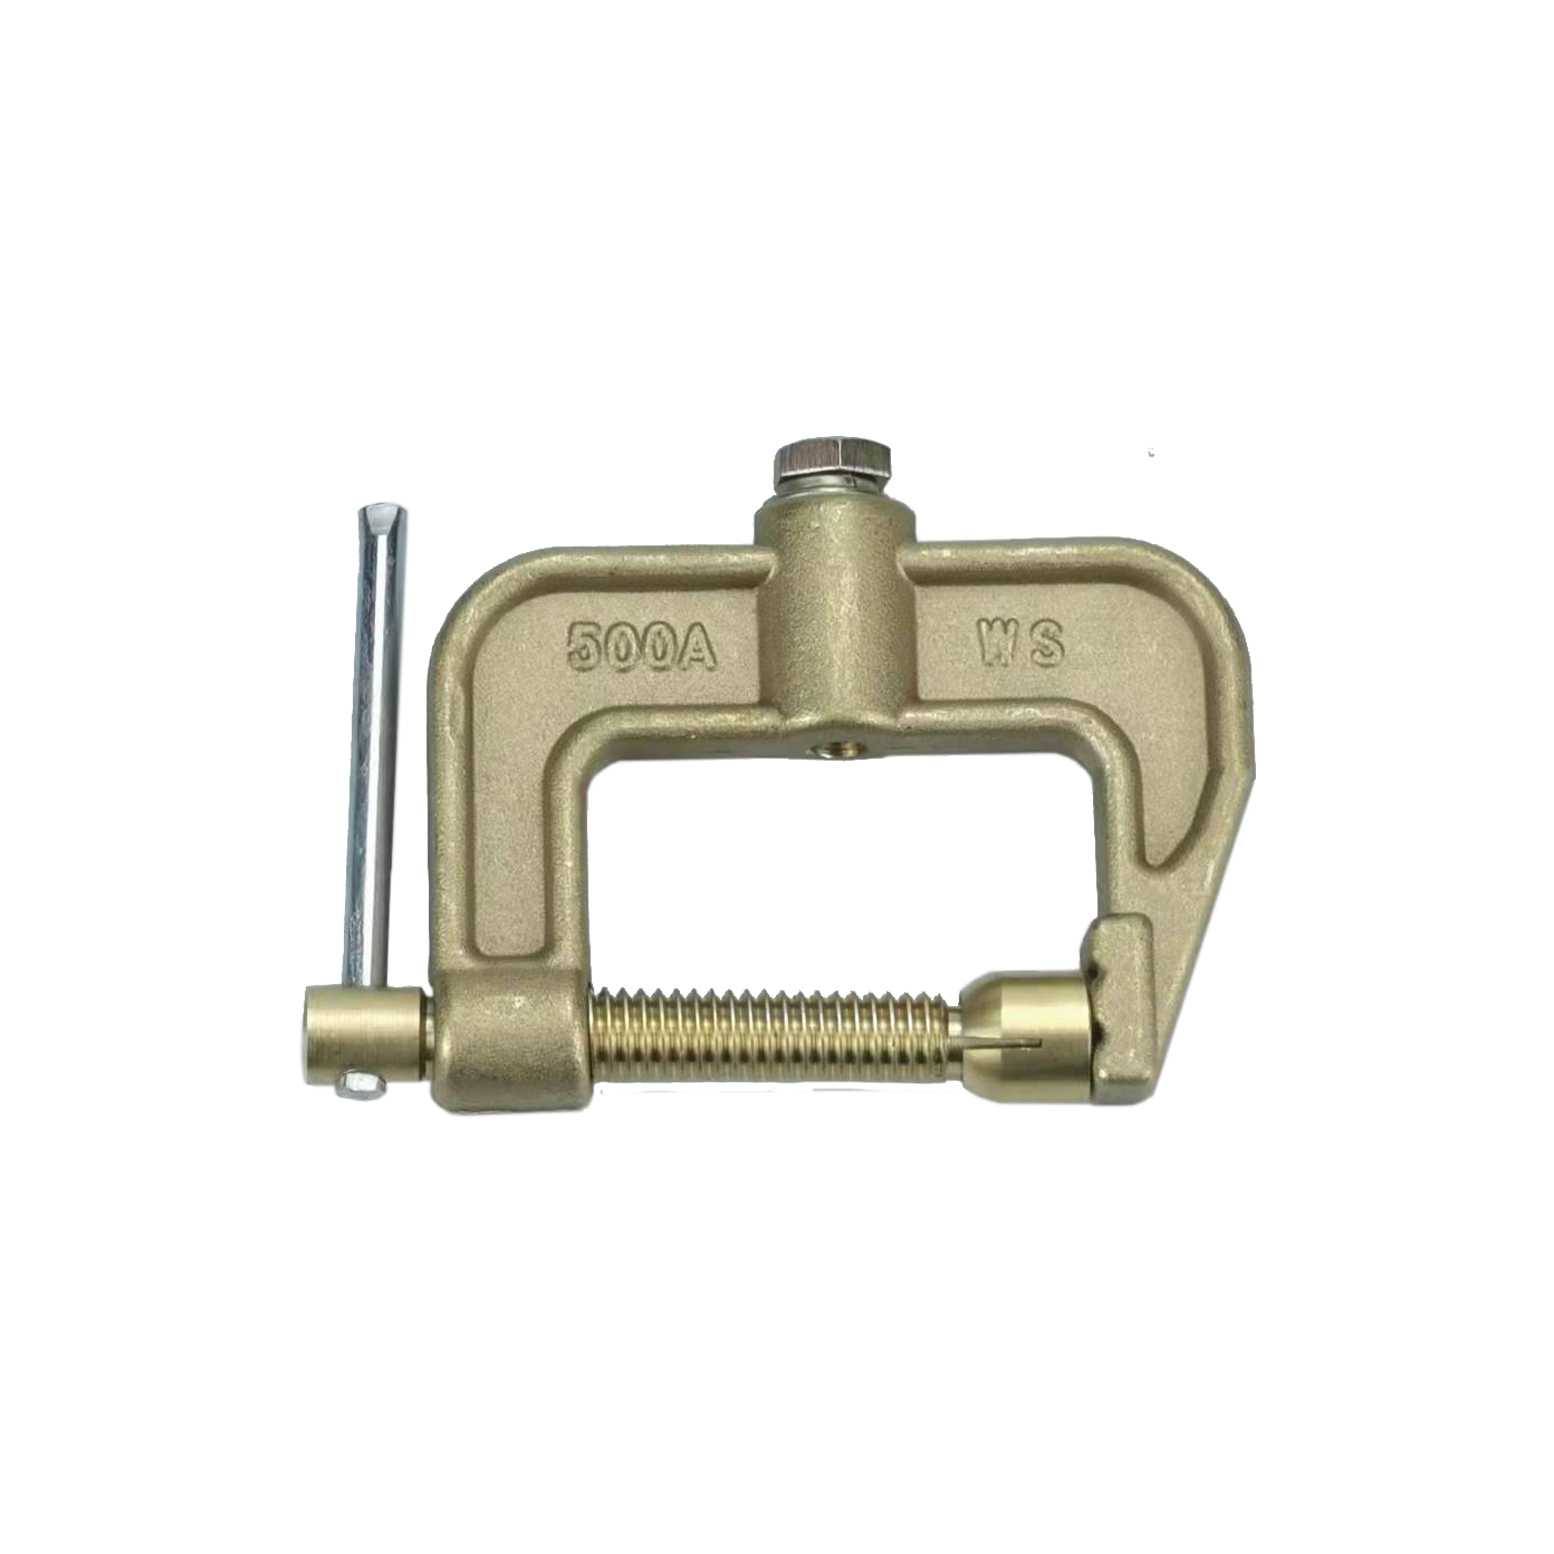 Details about   500A Brass Material C Shape Ground Welding Earth Clamp for Welding Machine 